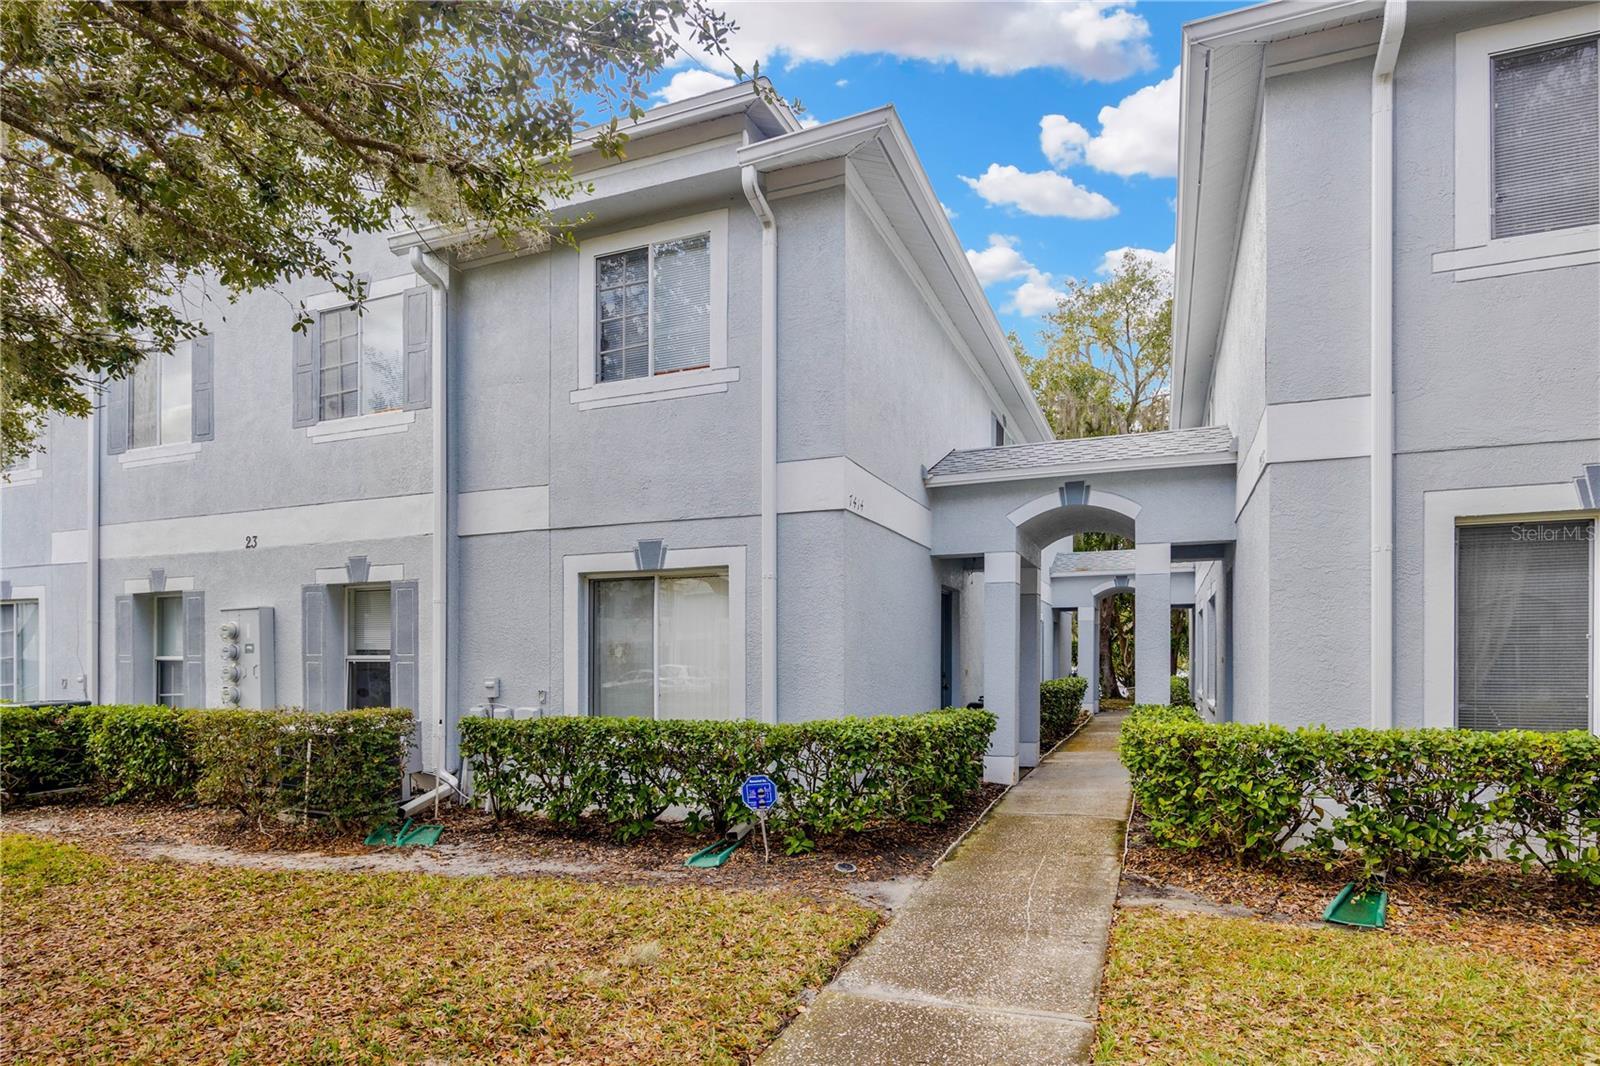 Photo one of 7416 E Bank Dr Tampa FL 33617 | MLS T3496103